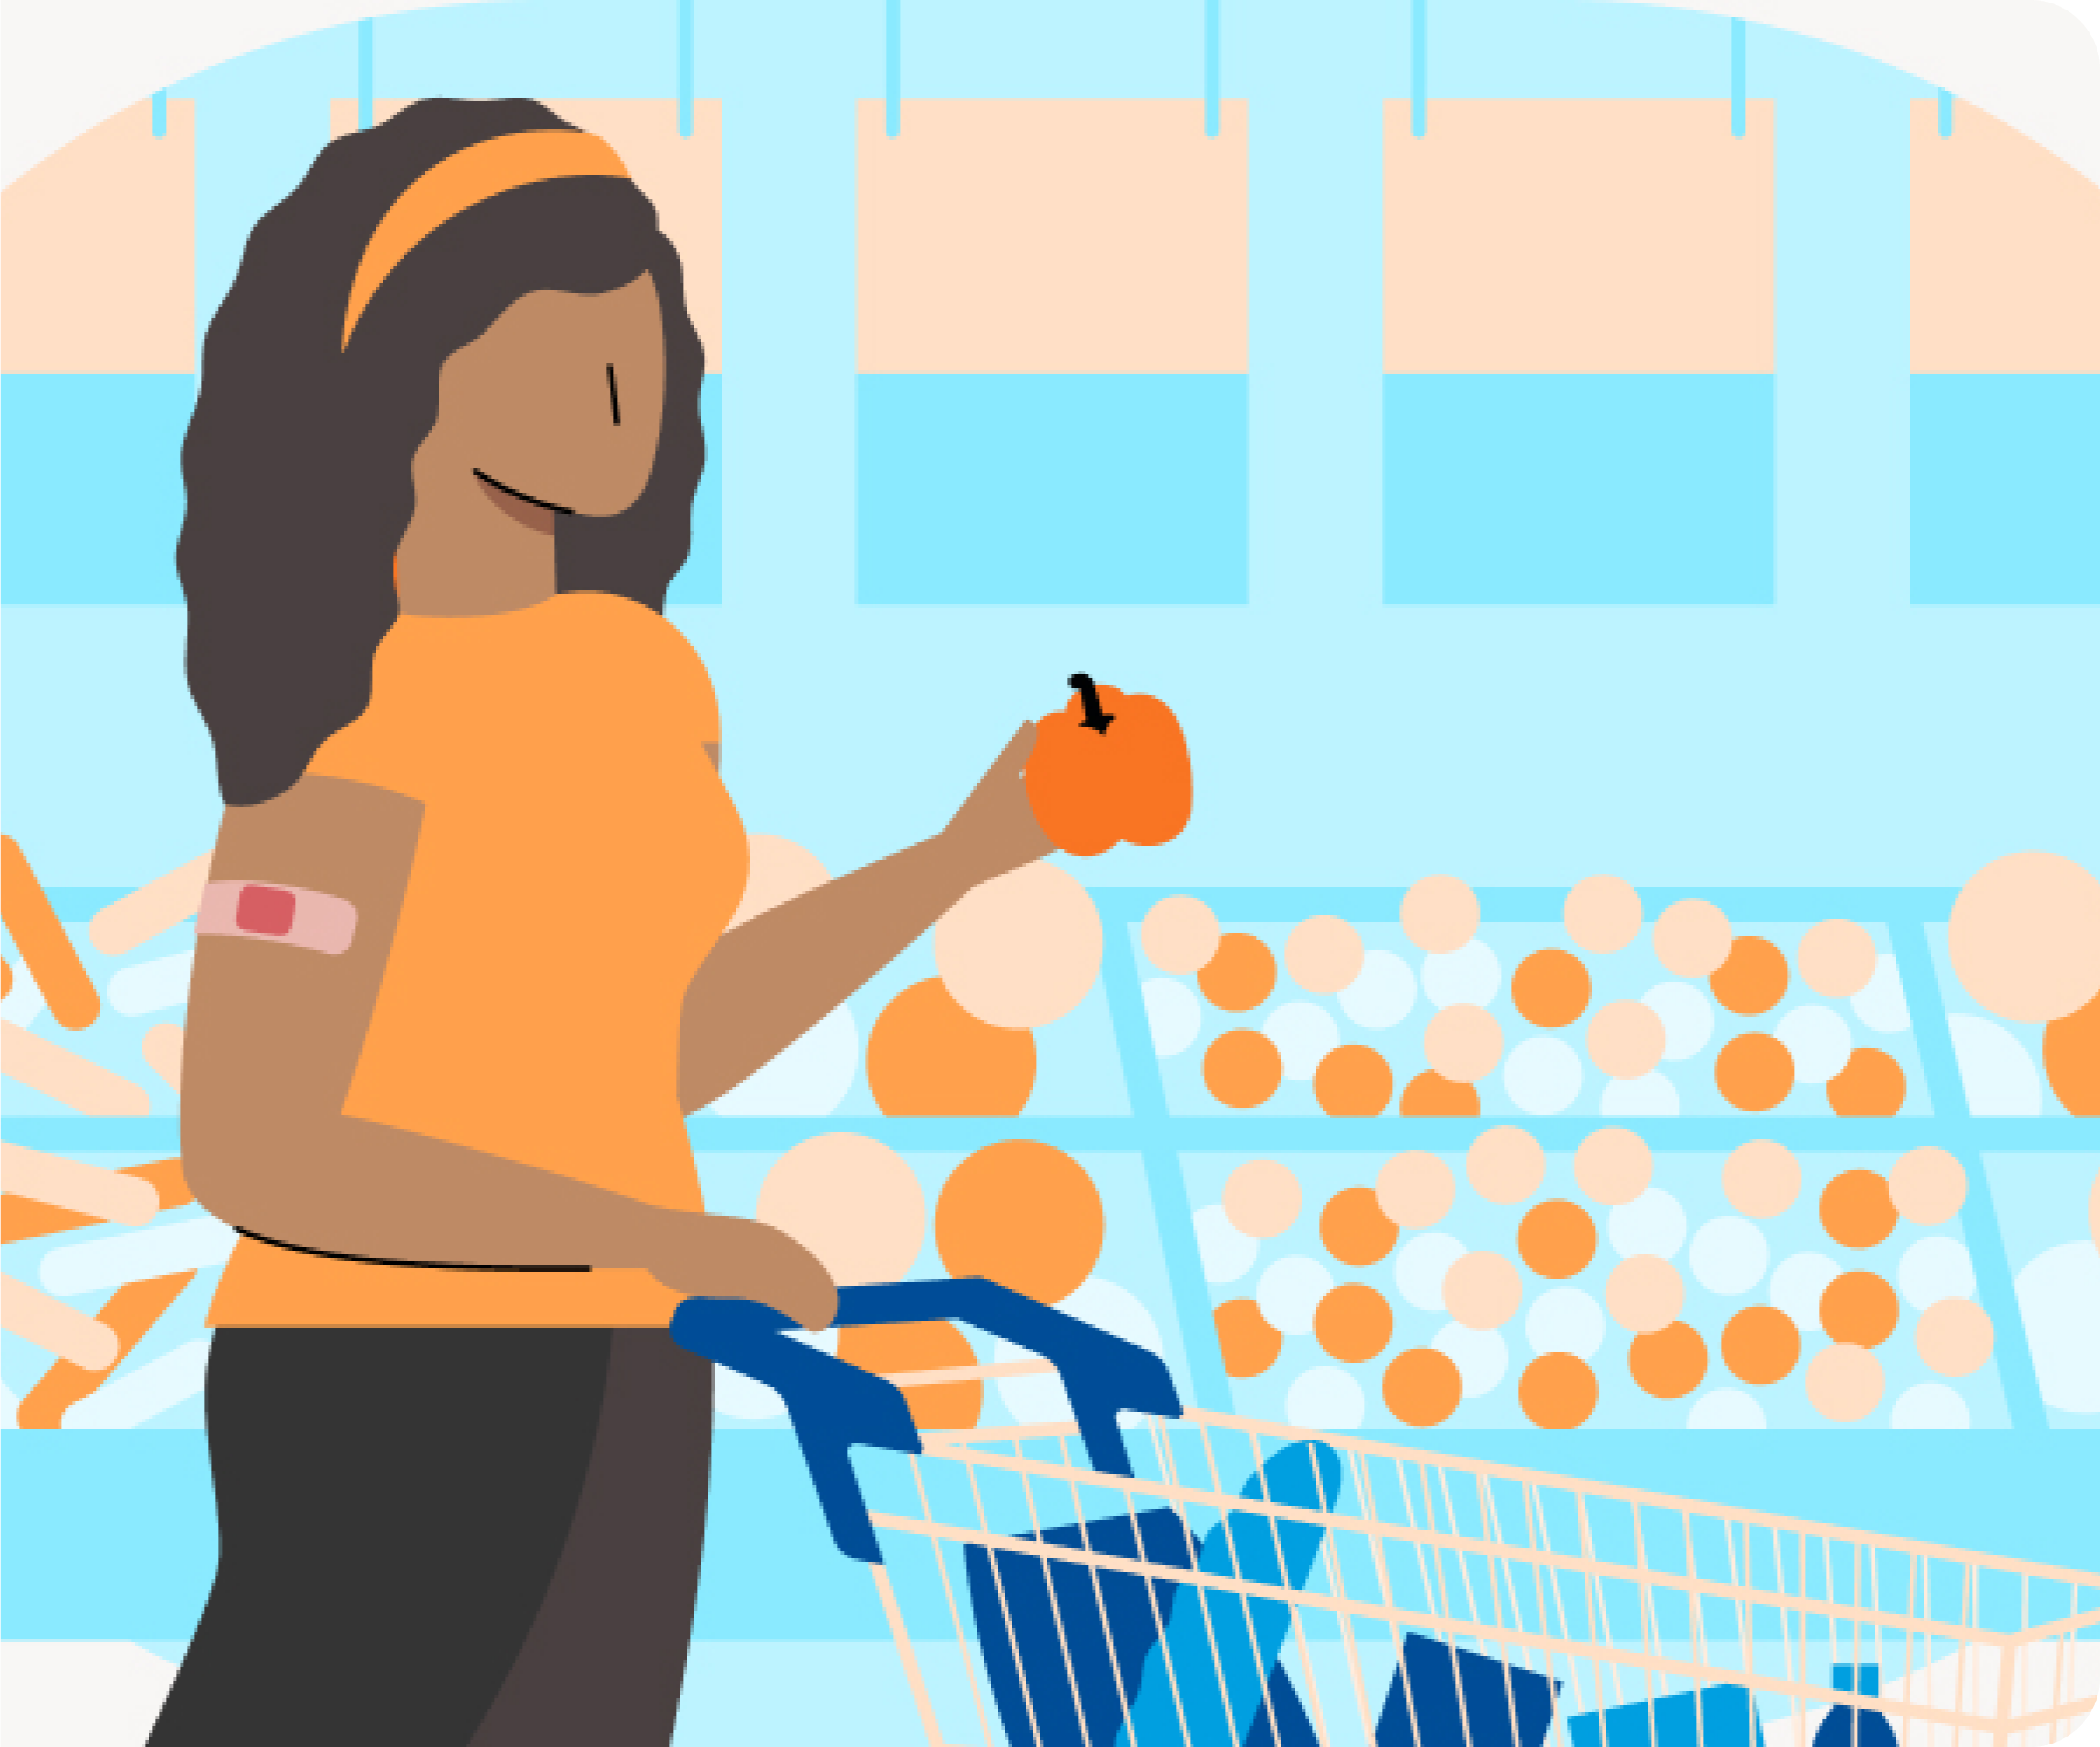 Illustrated image of a woman pushing a shopping cart holding a piece of produce in her hand